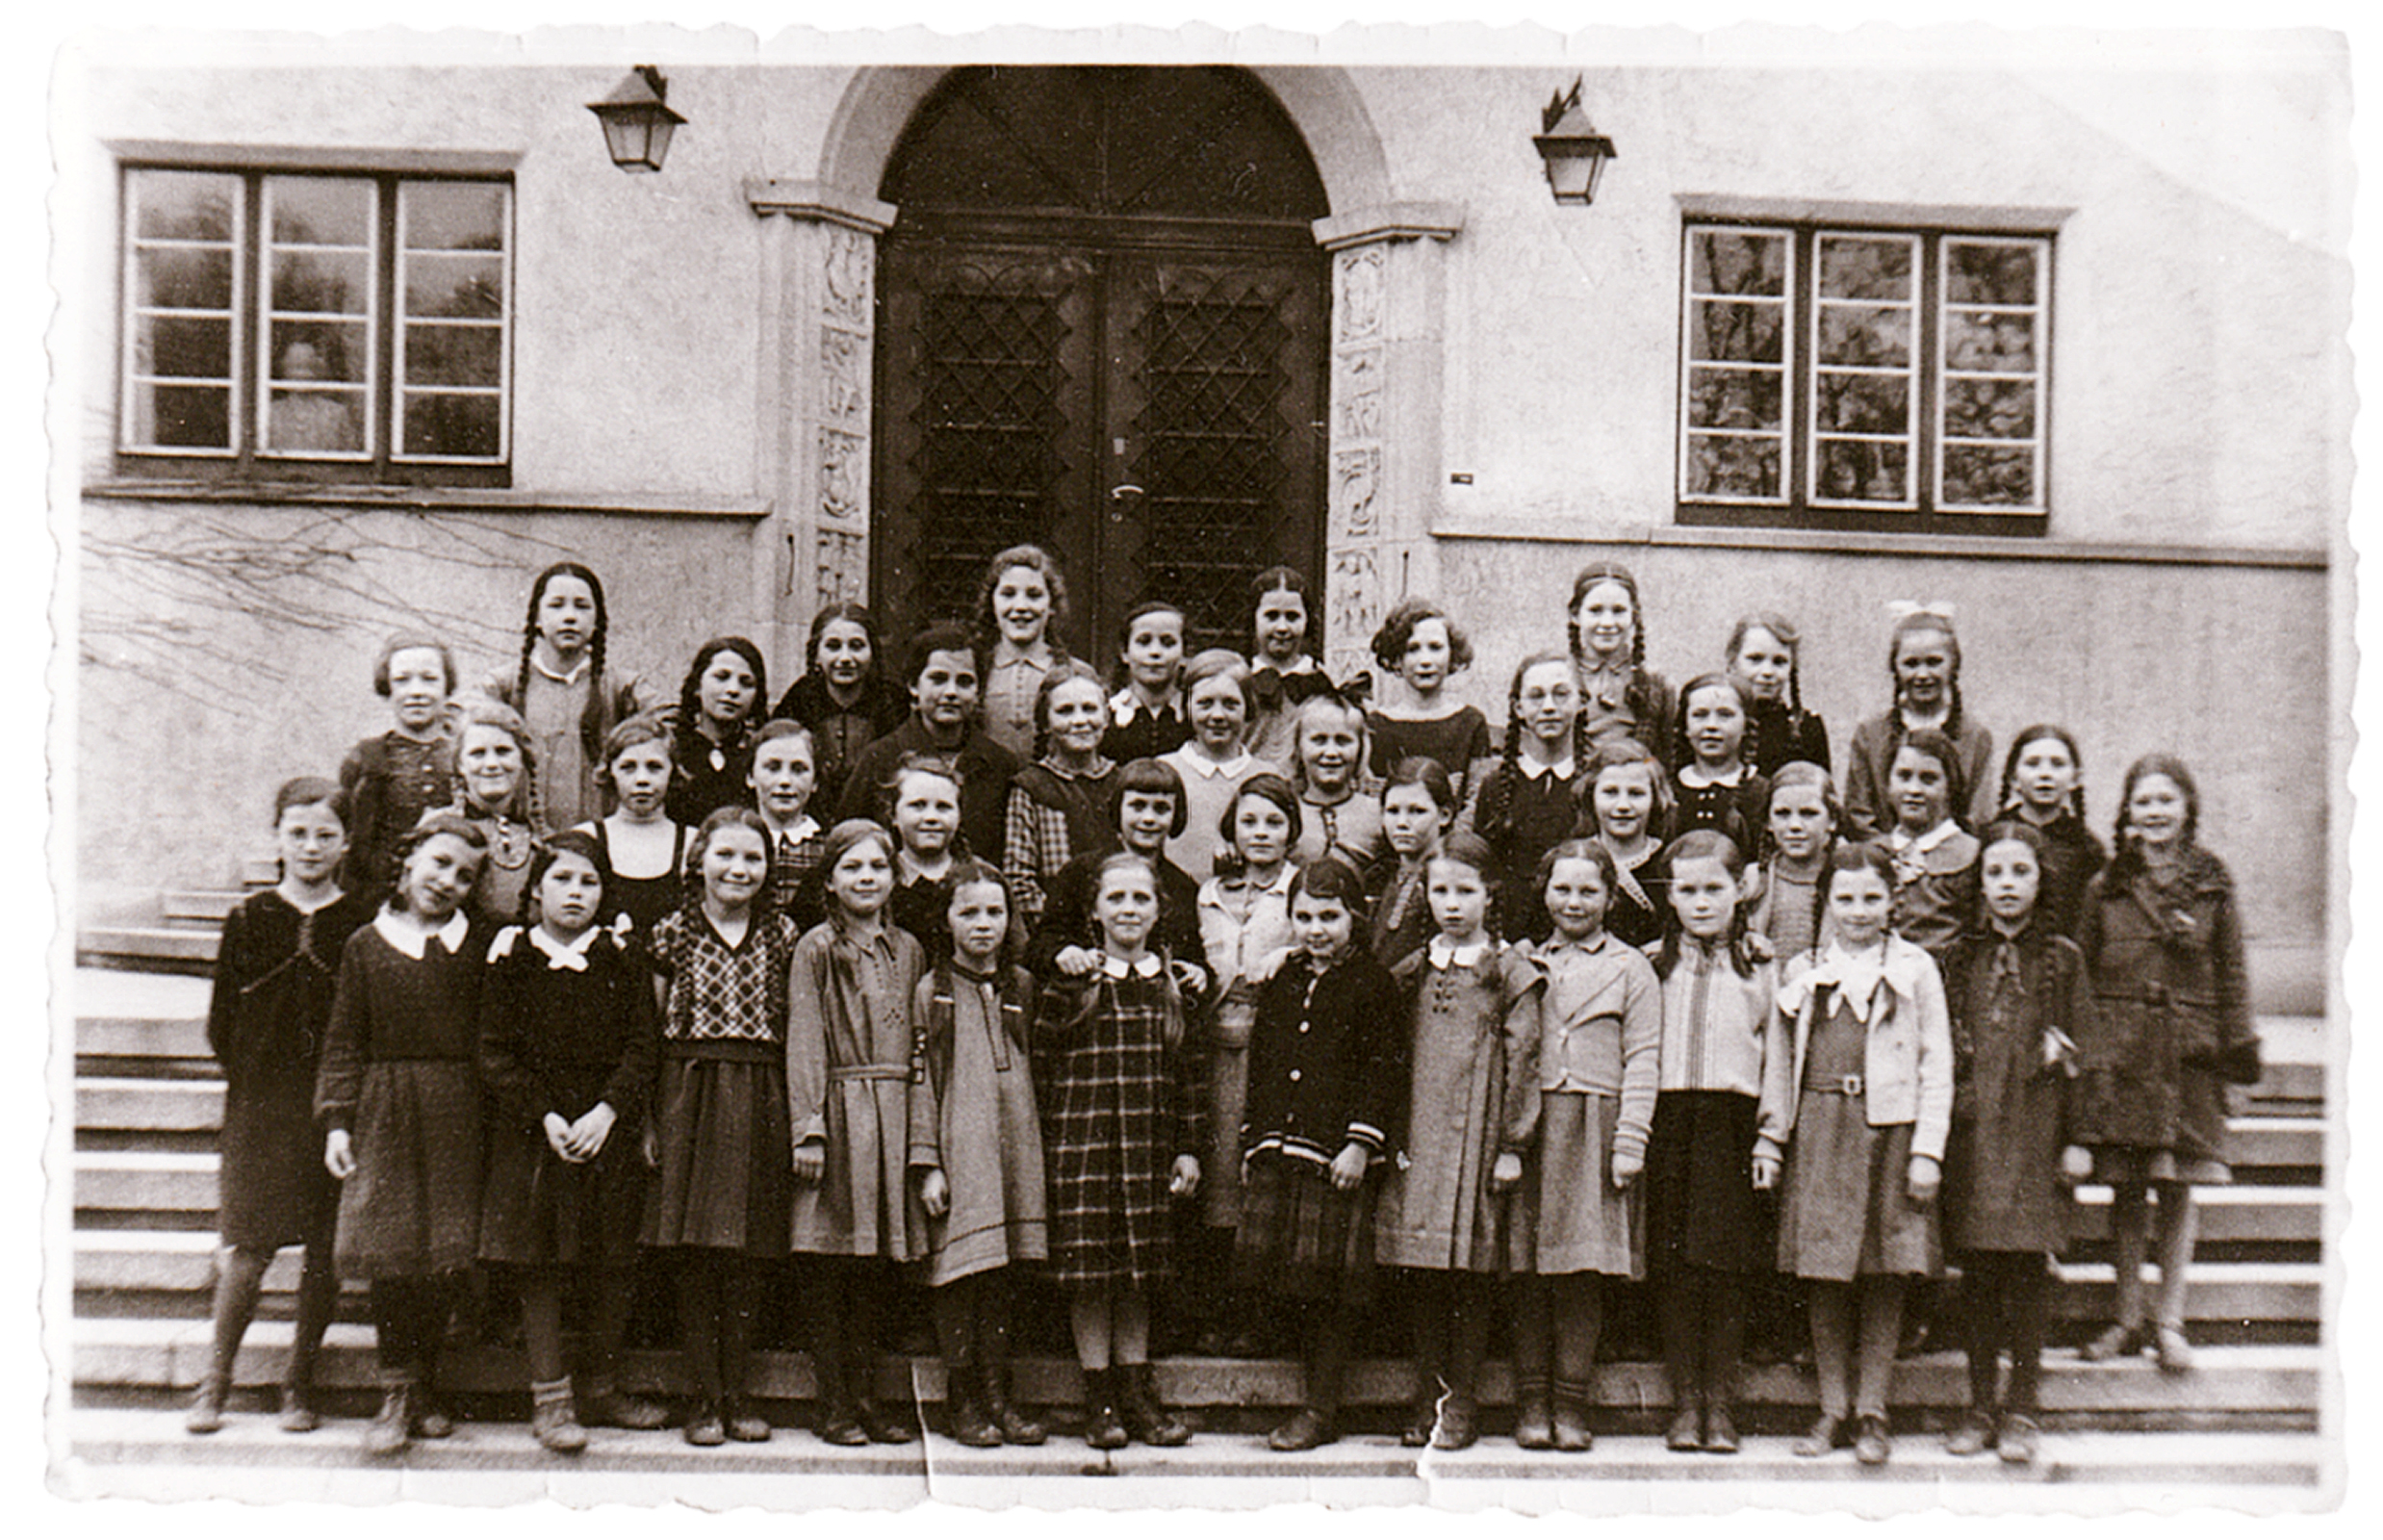 Class photo in front of the main entrance of the girls' secondary school in 1935. In the last row, immediately to the right of the door, Doris Bernheim.